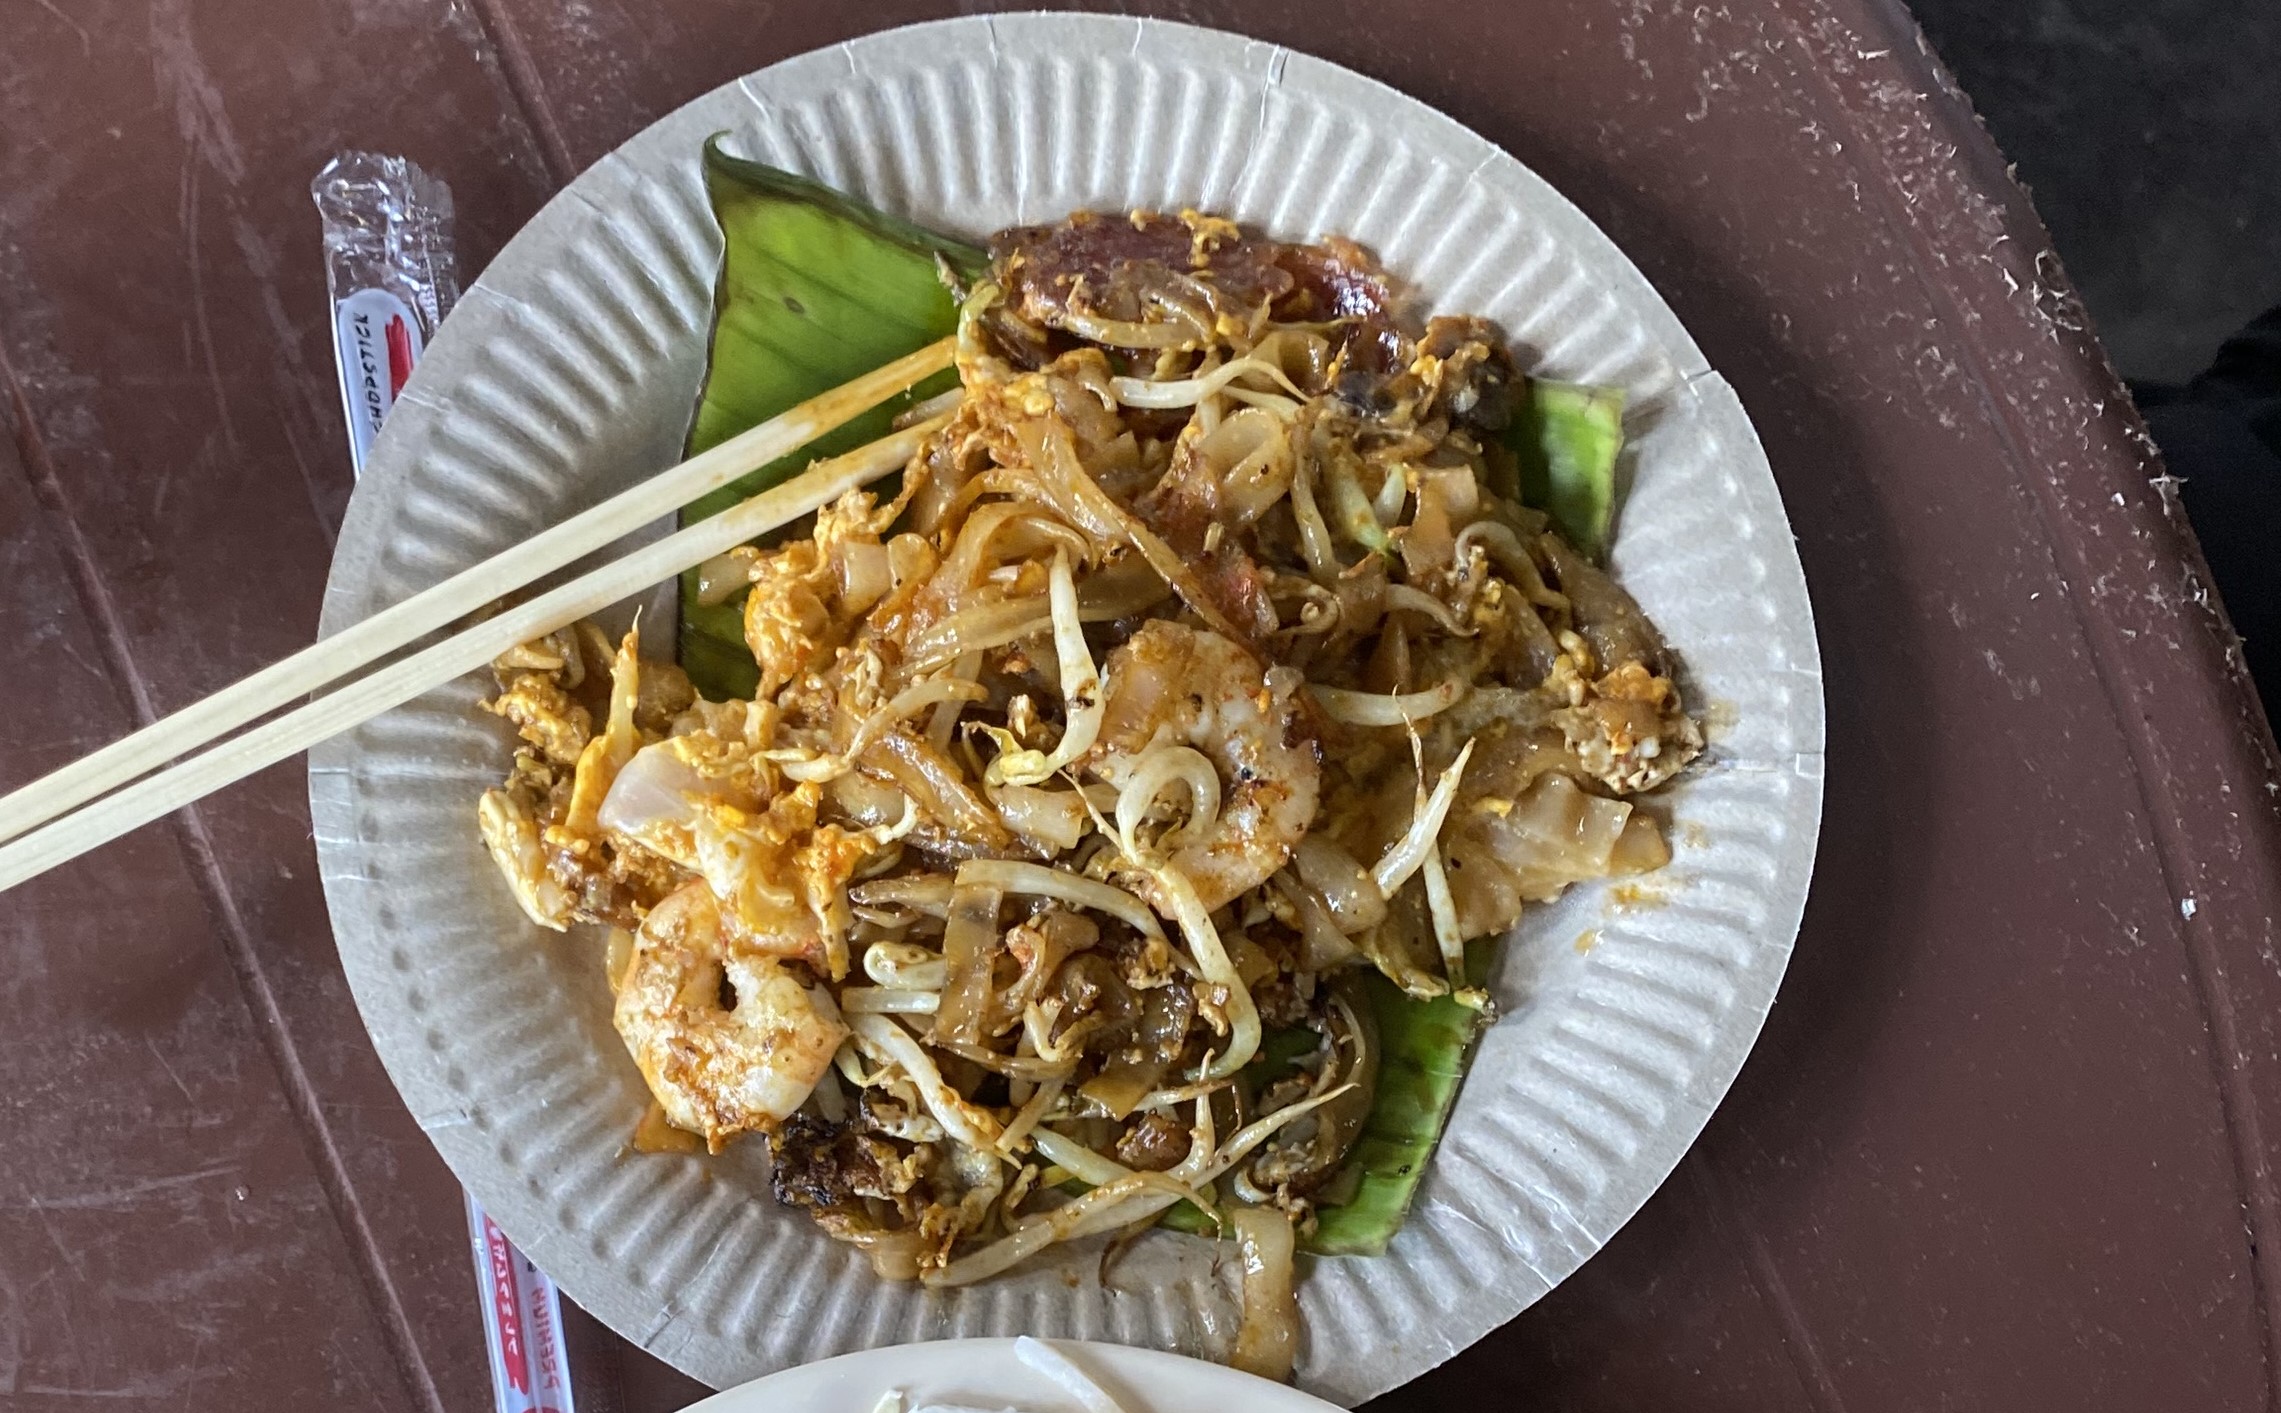 A plate of char kuey teow